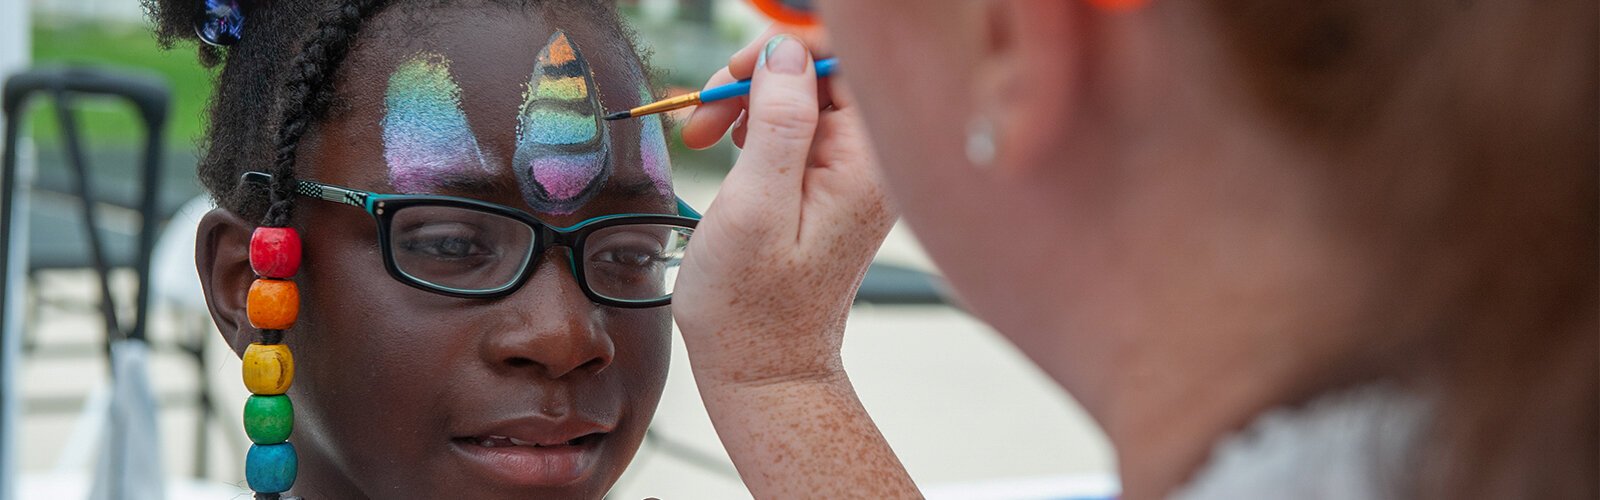 Destiny Mickell, 8, of Tampa, gets her face painted in the vendor area of this year's St Pete Pride Parade. Destiny moved to Tampa from Illinois with her family three weeks ago.